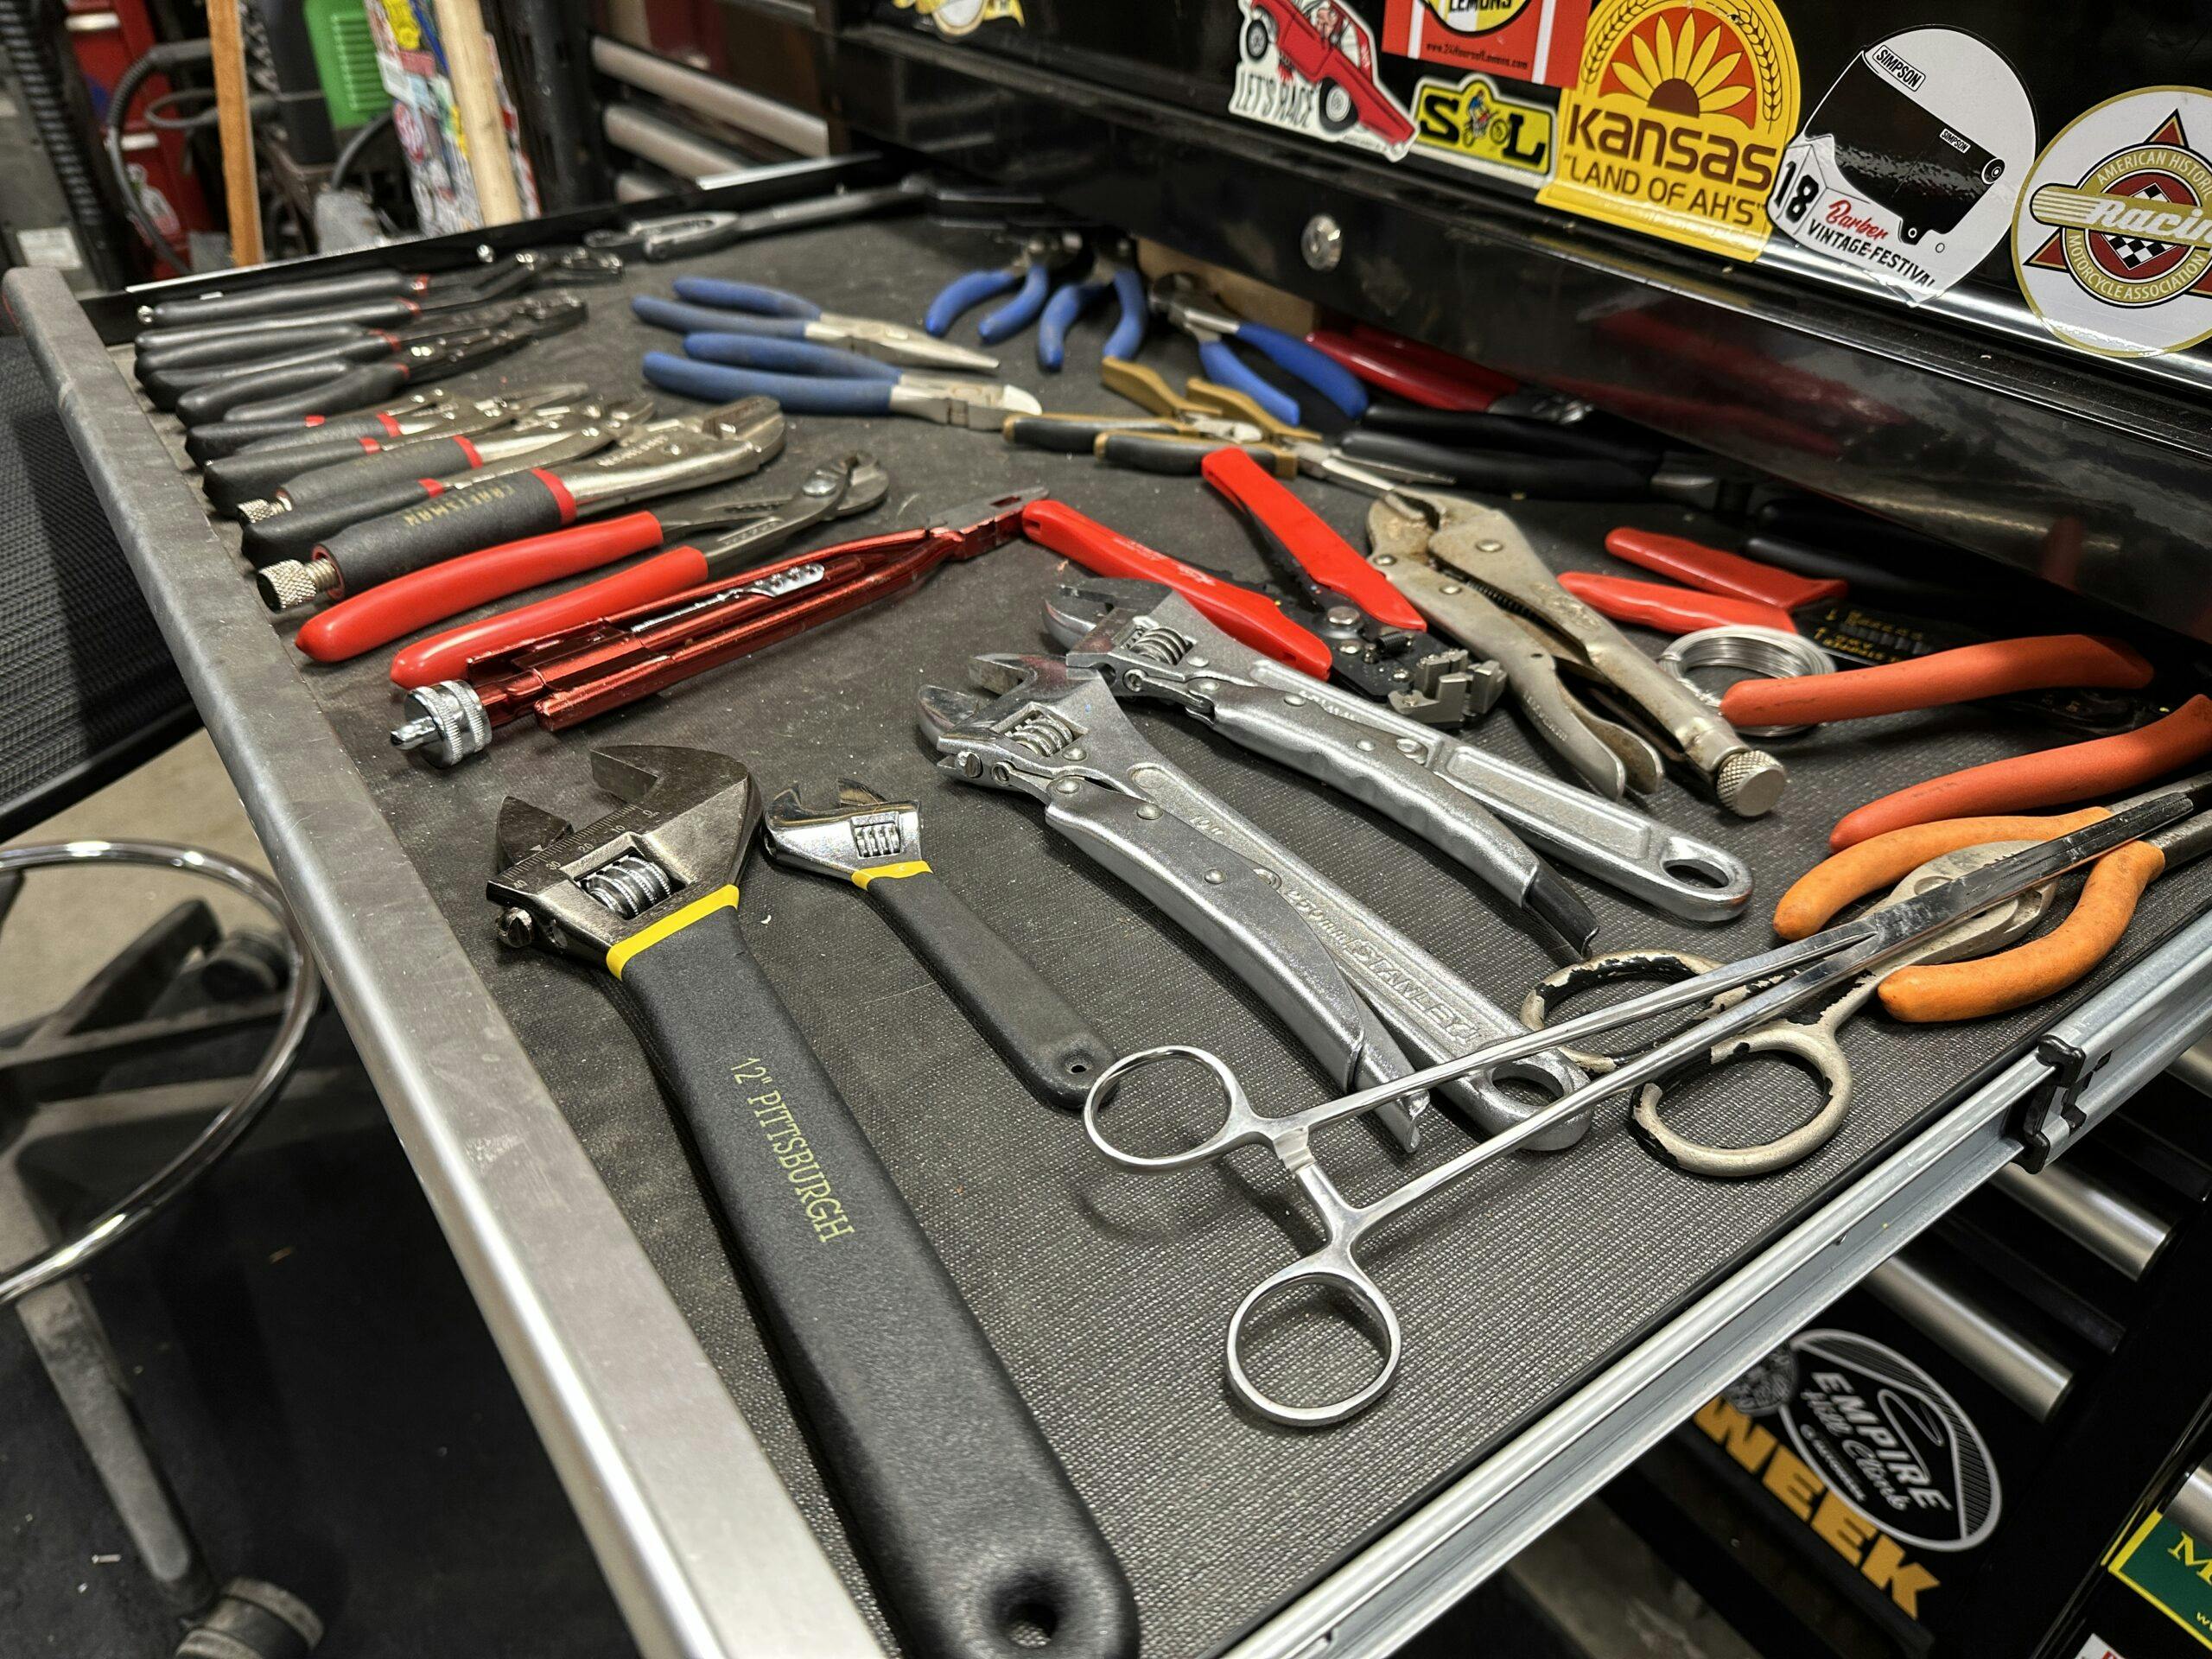 You can cheap out on these 5 tools - Hagerty Media